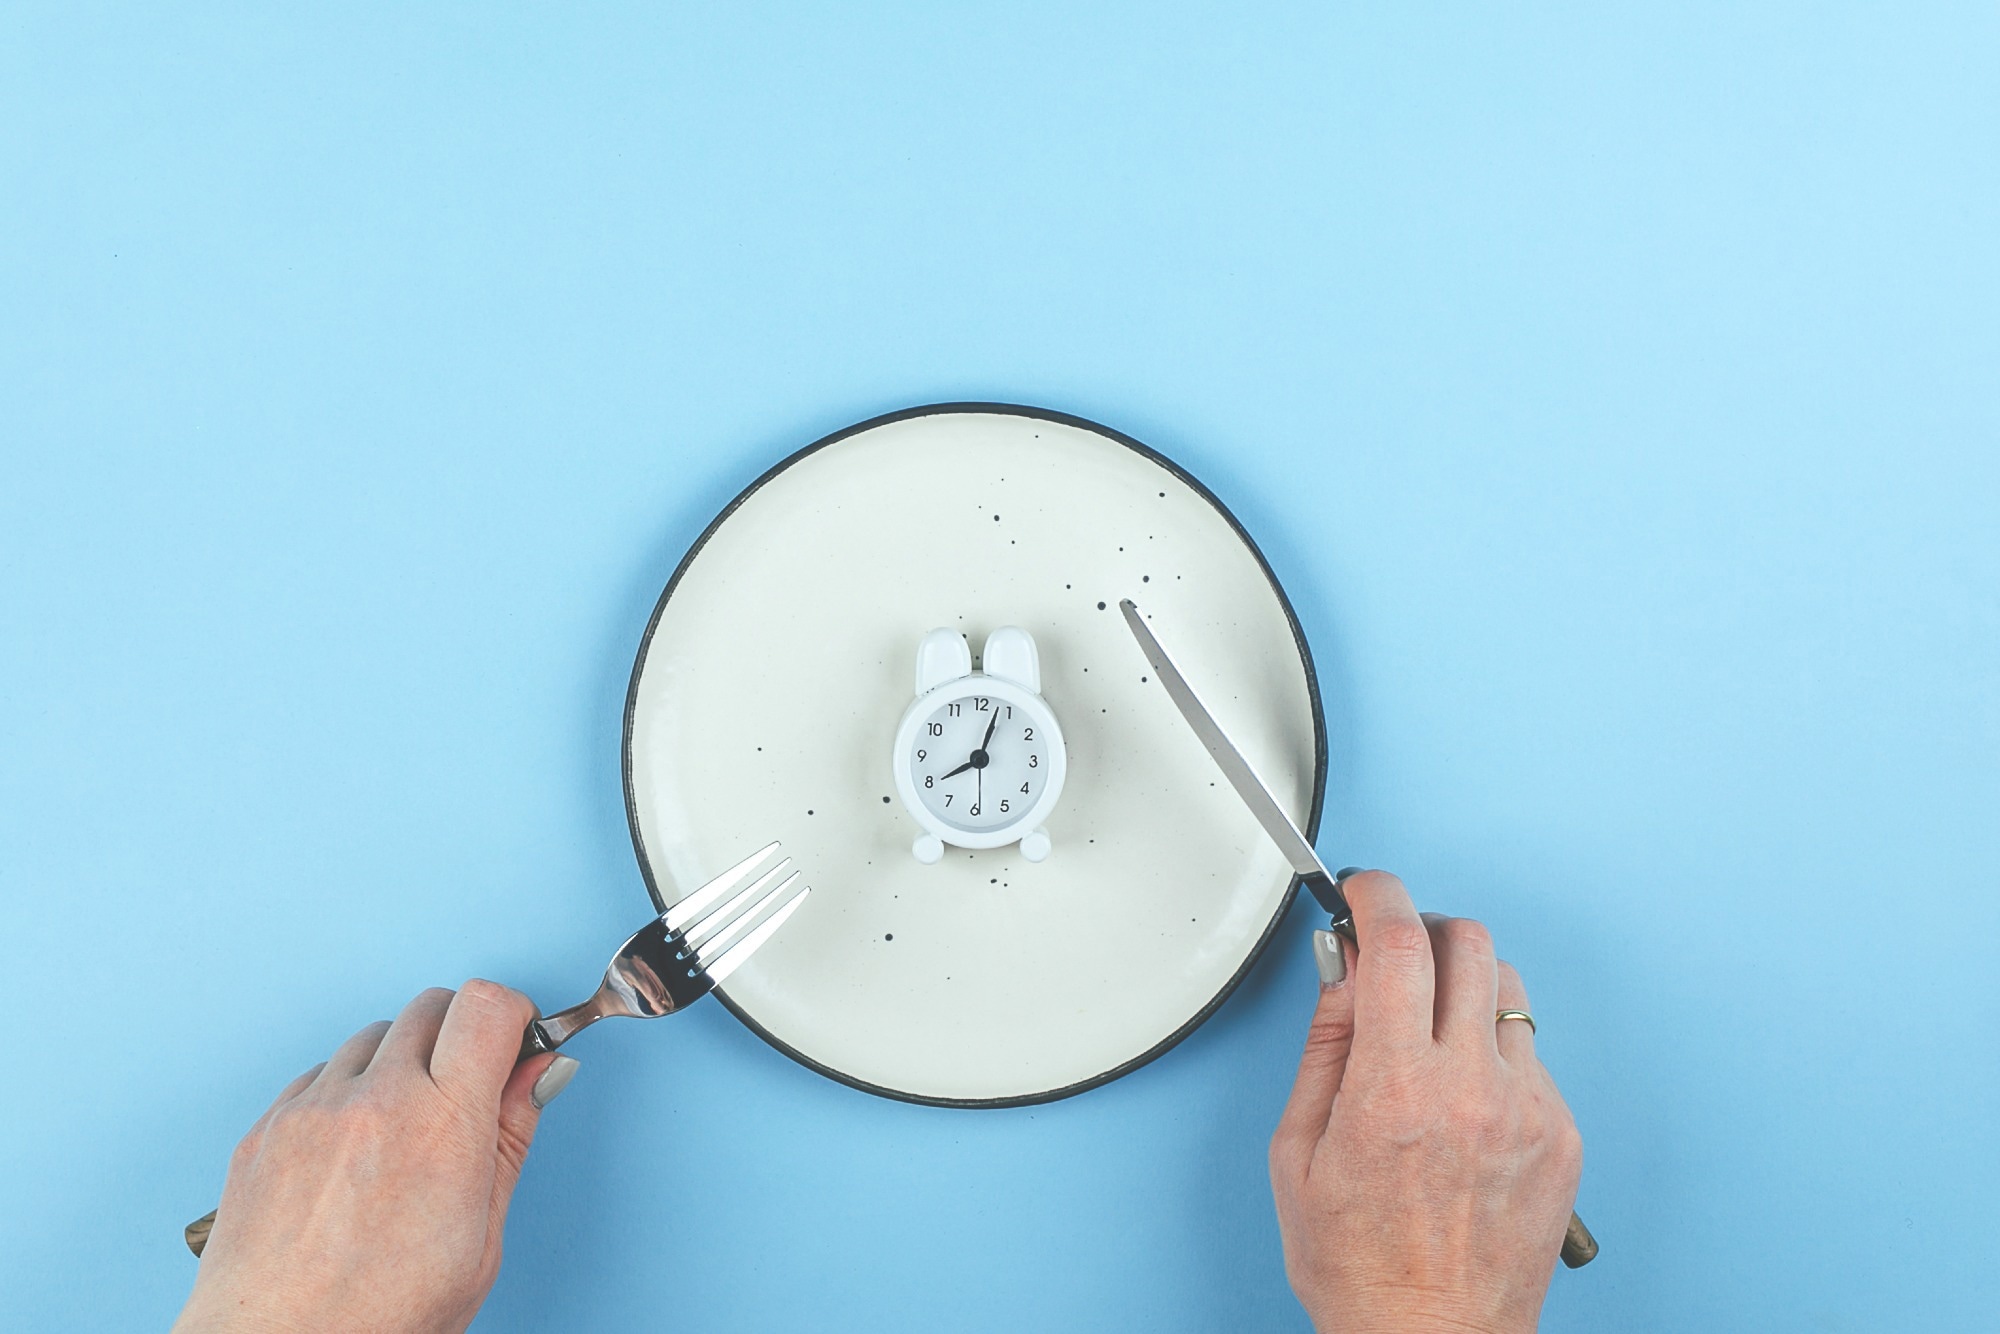 Study: The Effect of Intermittent Fasting on Appetite: A Systematic Review and Meta-Analysis. Image Credit: AnikonaAnn/Shutterstock.com